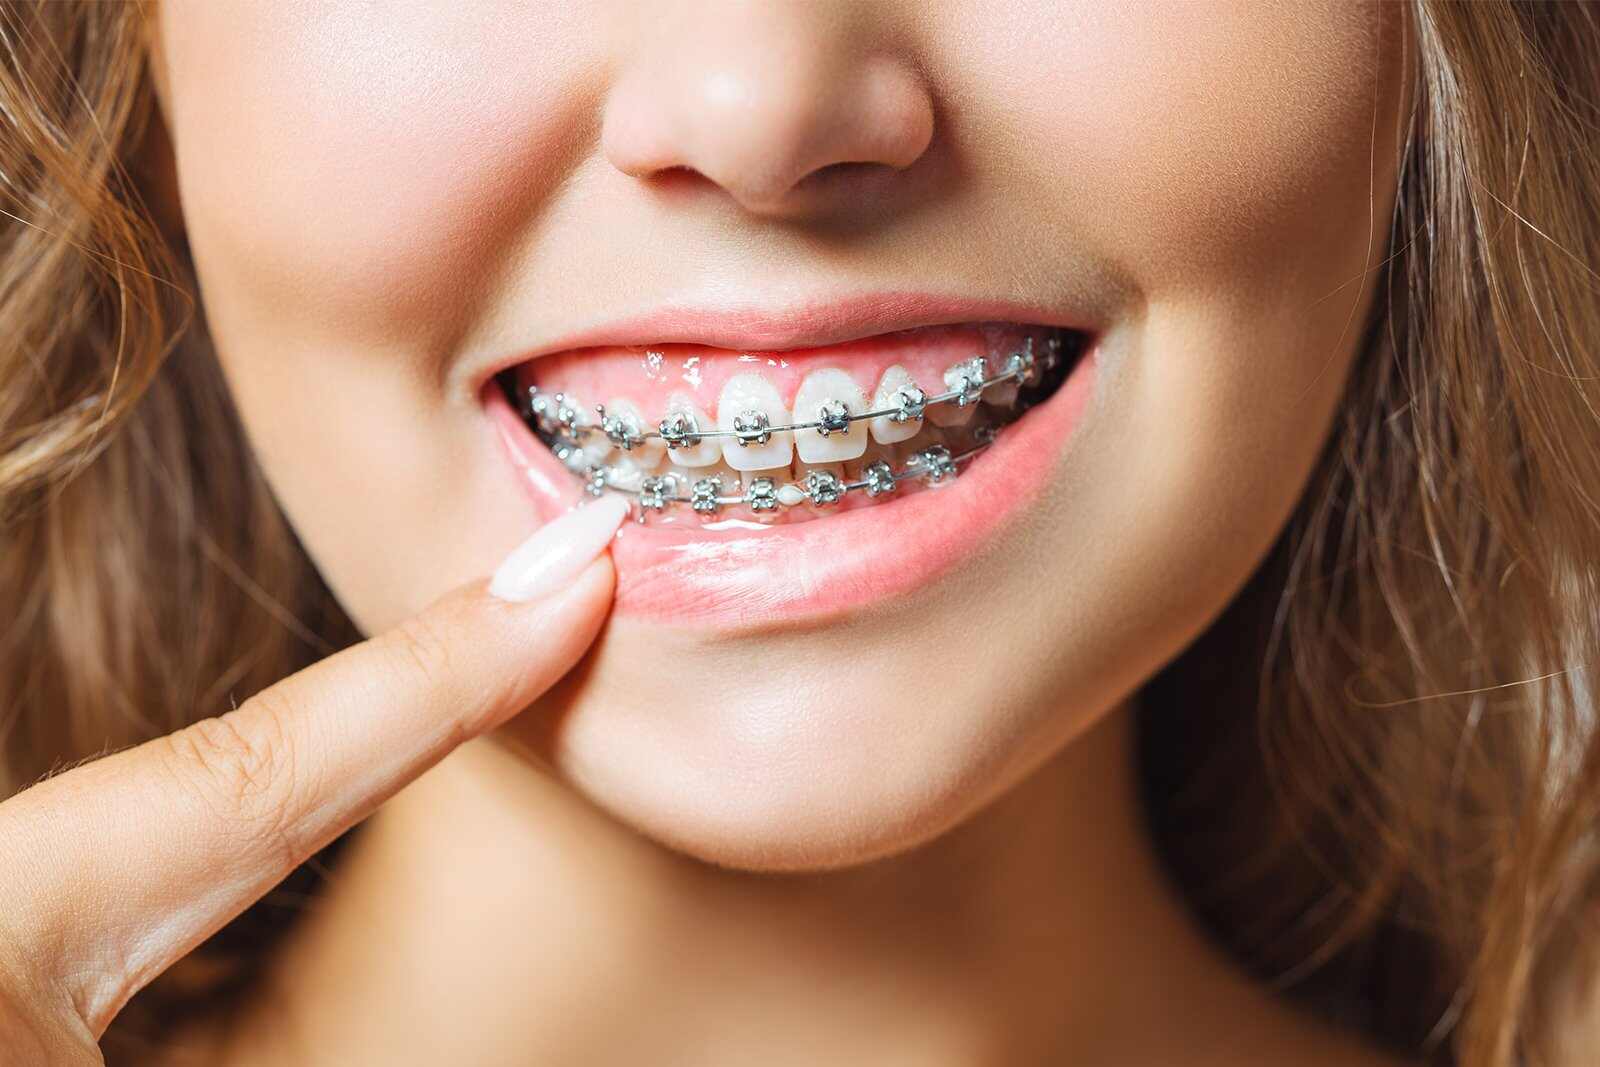 how does orthodontic treatments impact speech and eating